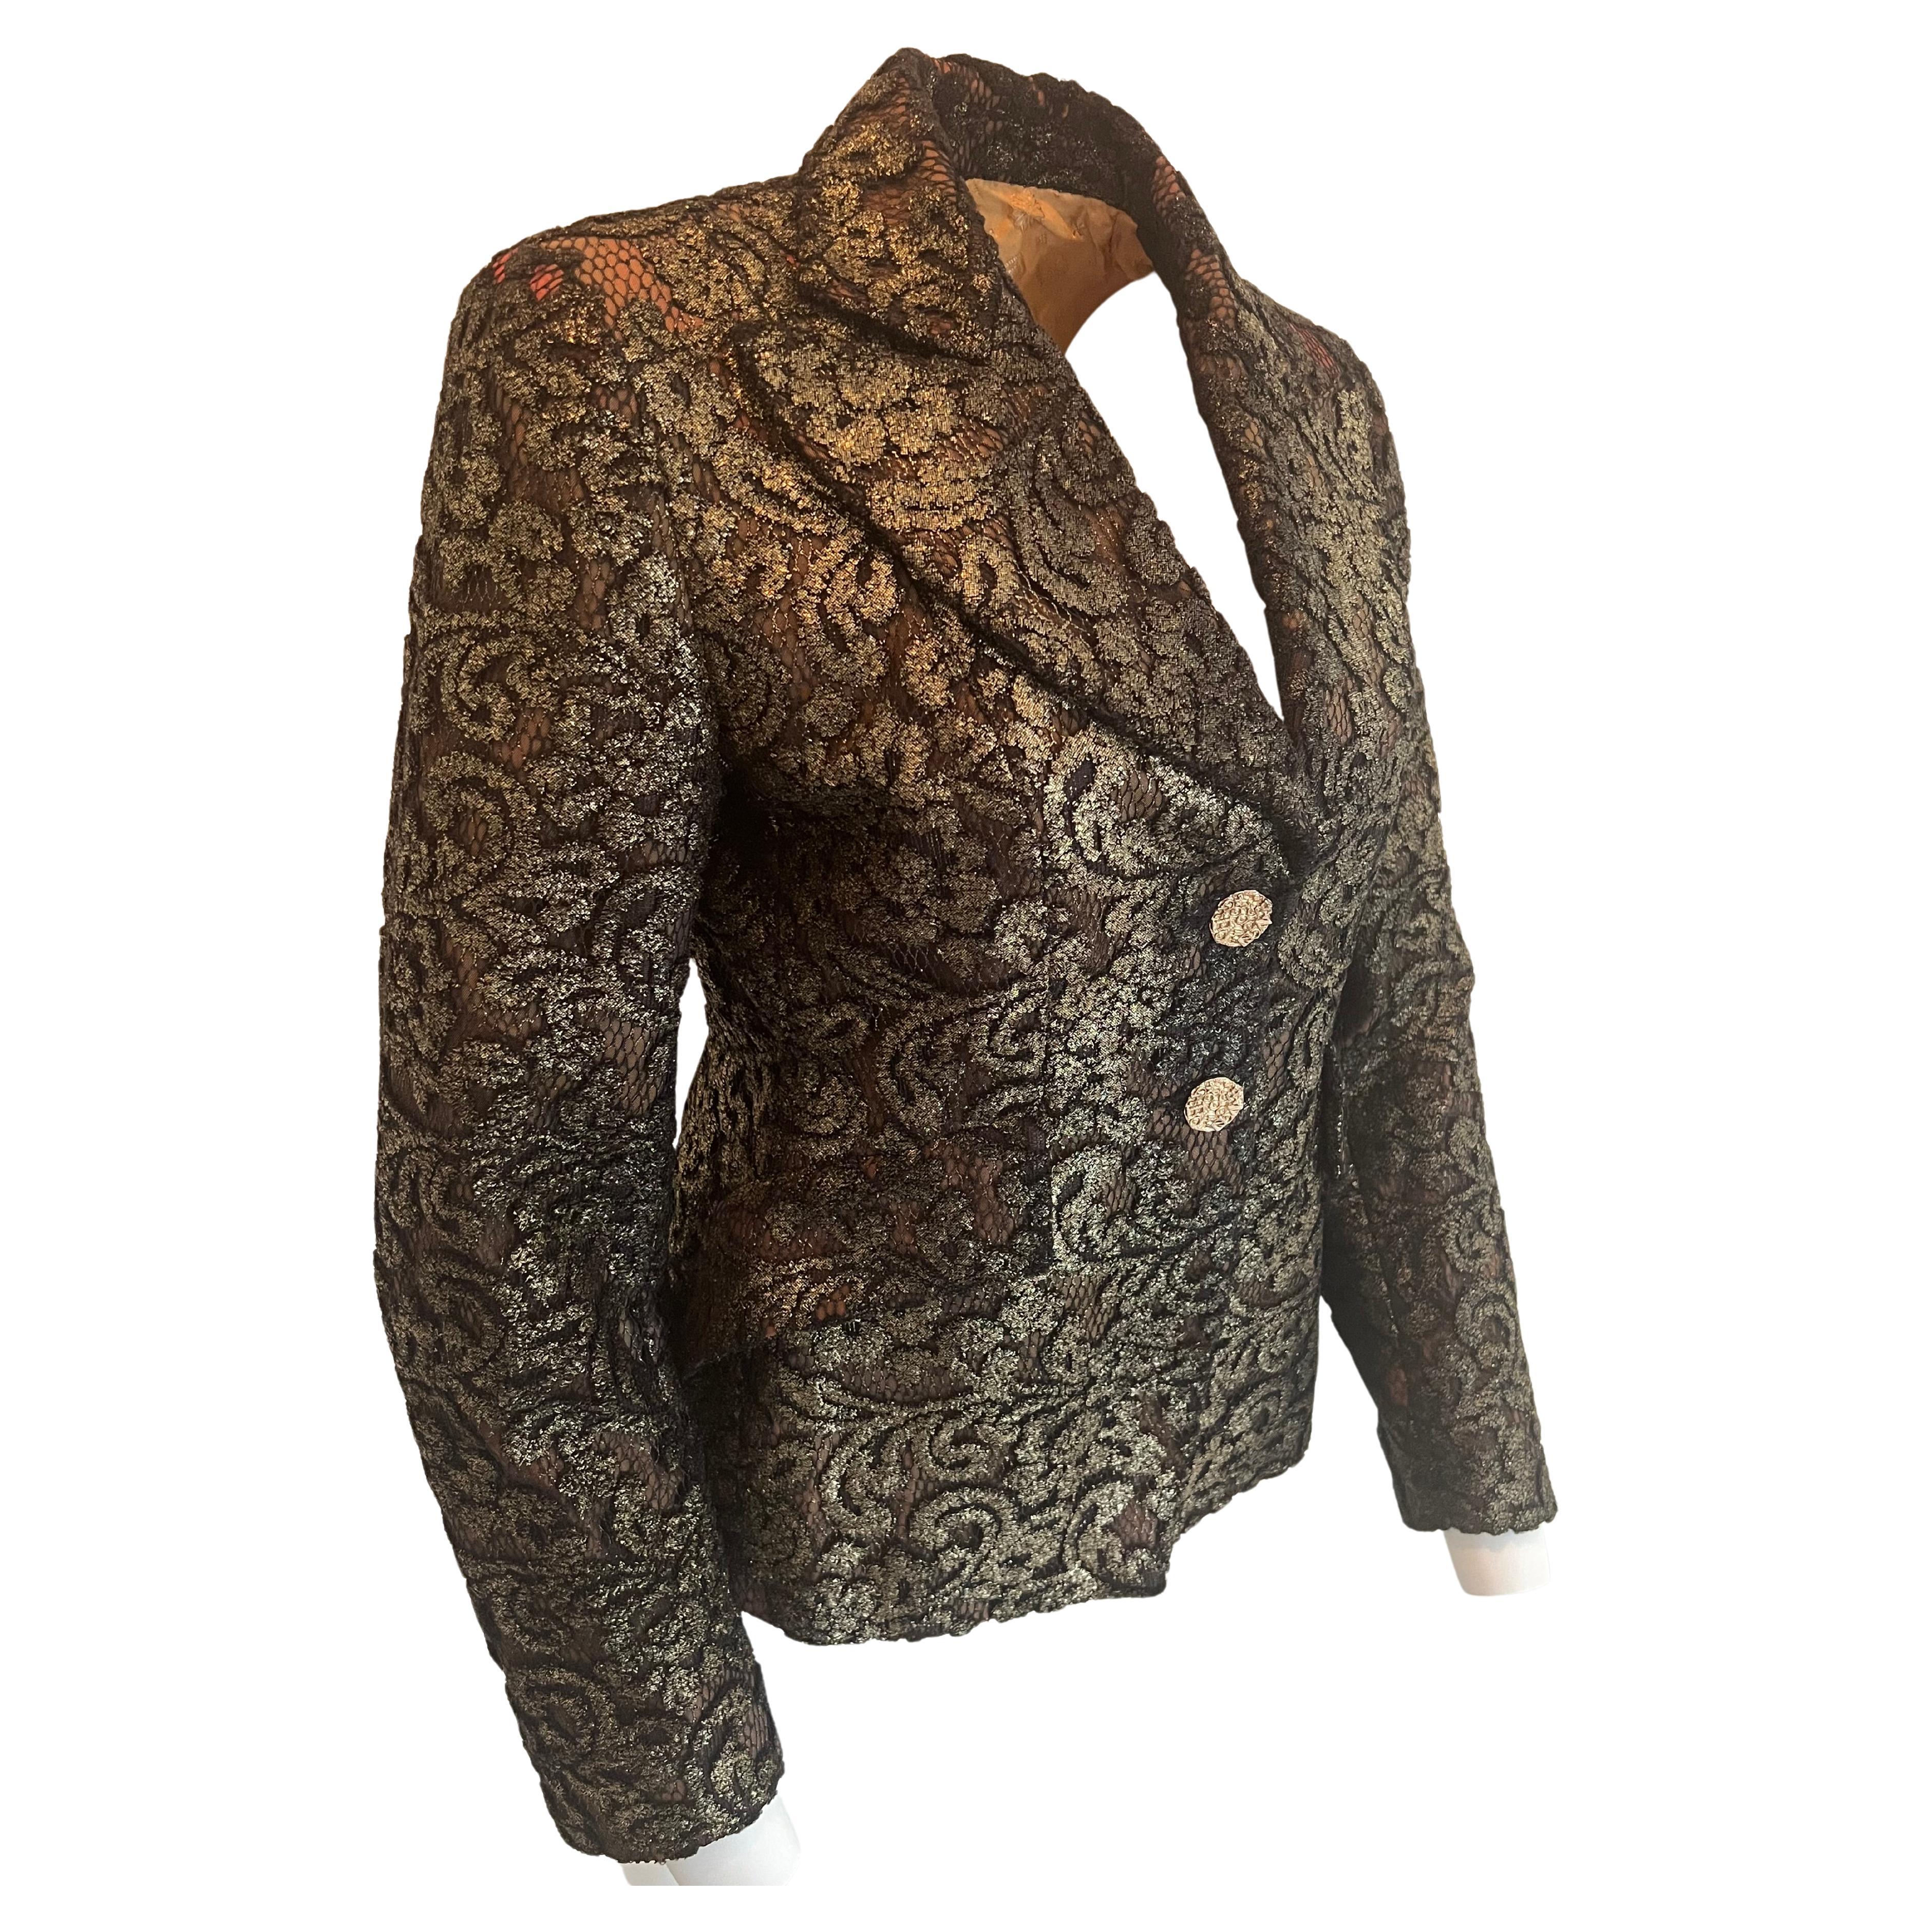 Christian Lacroix BAZAR made in France. Jacket in black and gold lace with a few red shades in the lace lining fitted cut, large slanted pocket stiff collar, cutout with two buttons on the back.